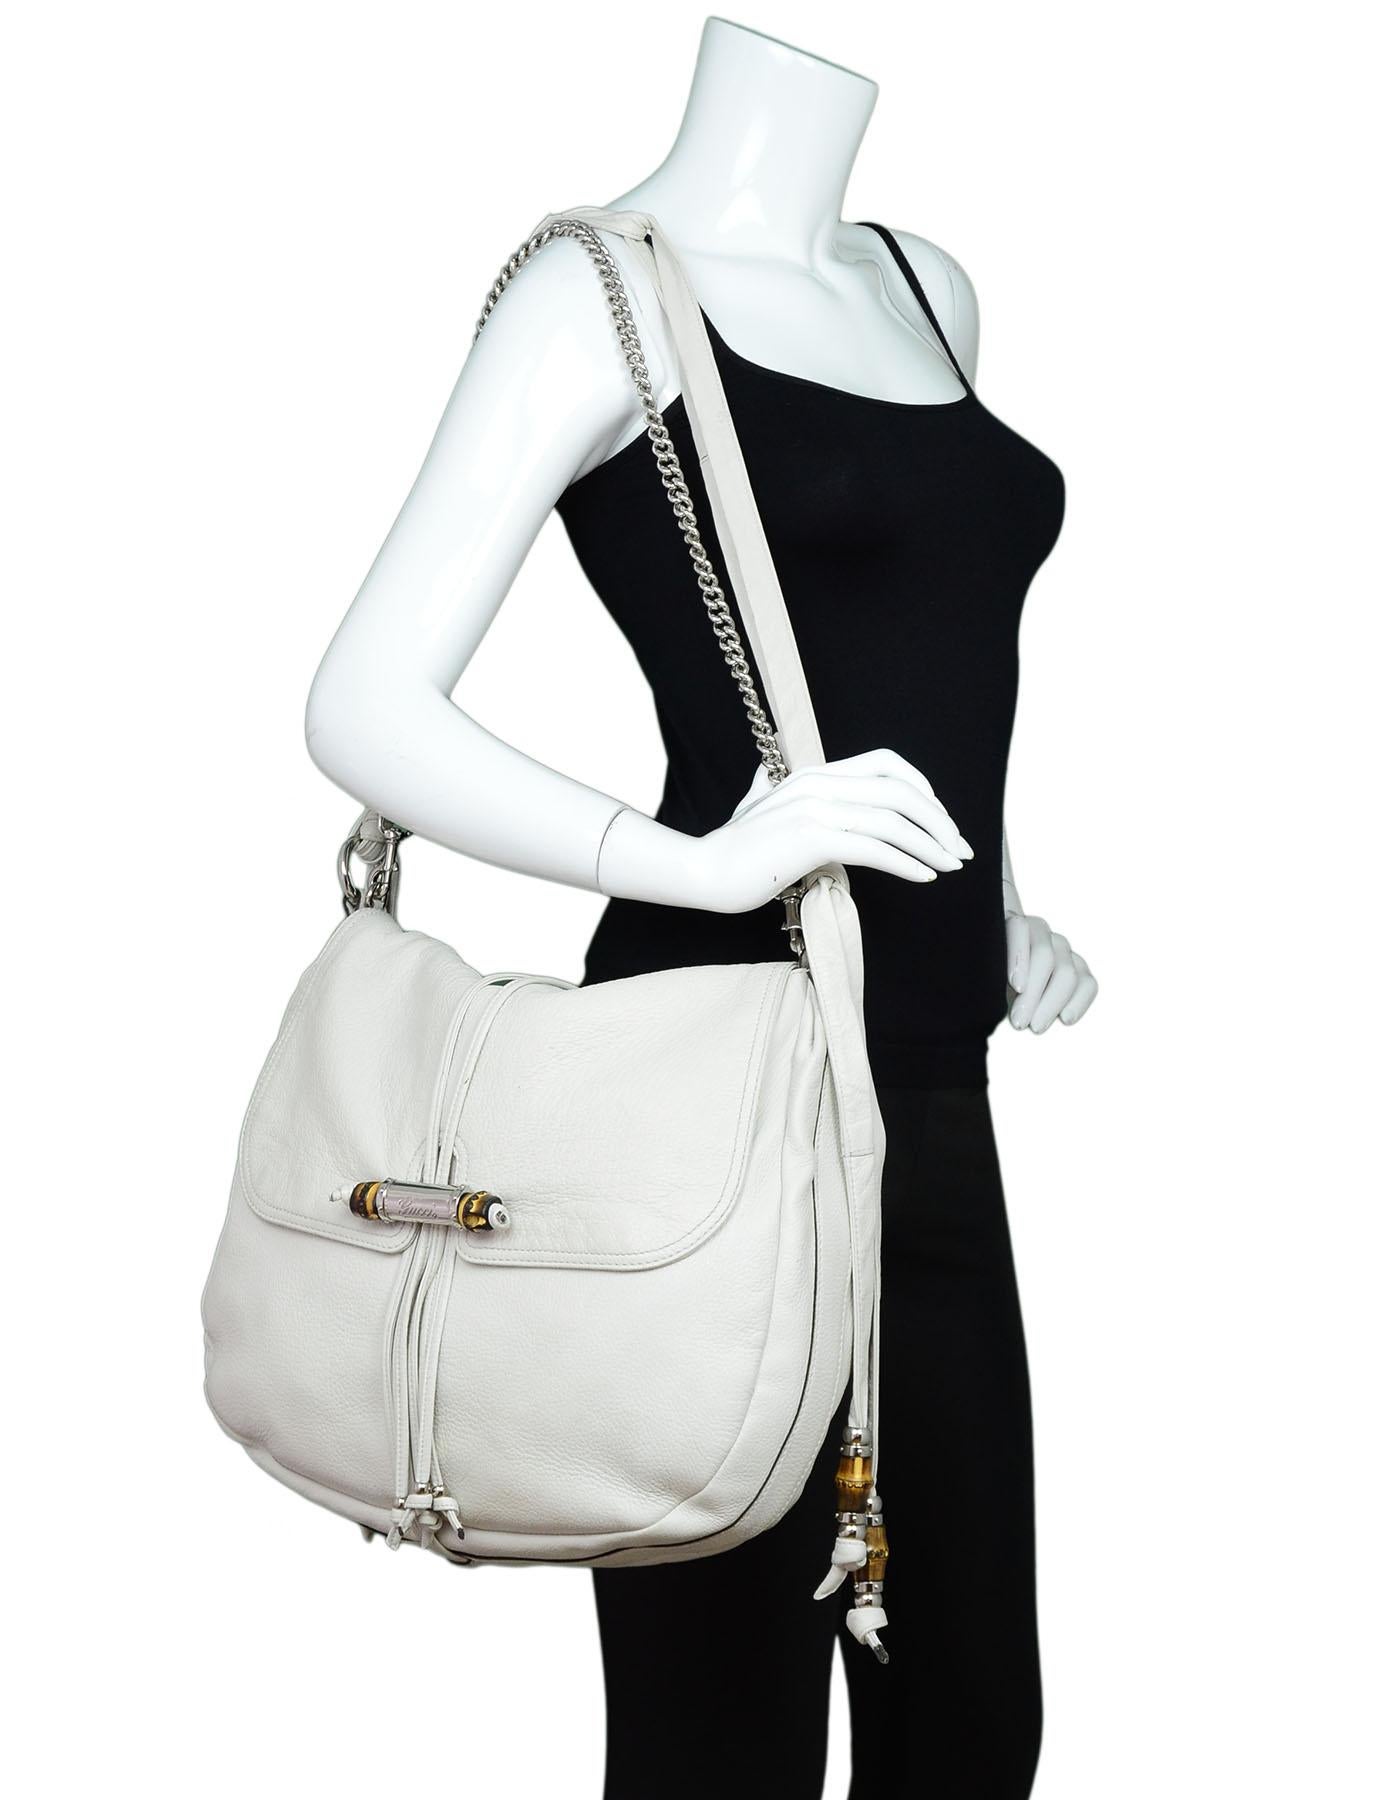 Gucci White Calfskin Large Jungle Shoulder Bag

Made In: Italy
Color: White
Hardware: Silvertone
Materials: Calfskin leather, bamboo, metal
Lining: Black textile
Closure/Opening: Flap top
Exterior Pockets: None
Interior Pockets: Zip wall pocket, two